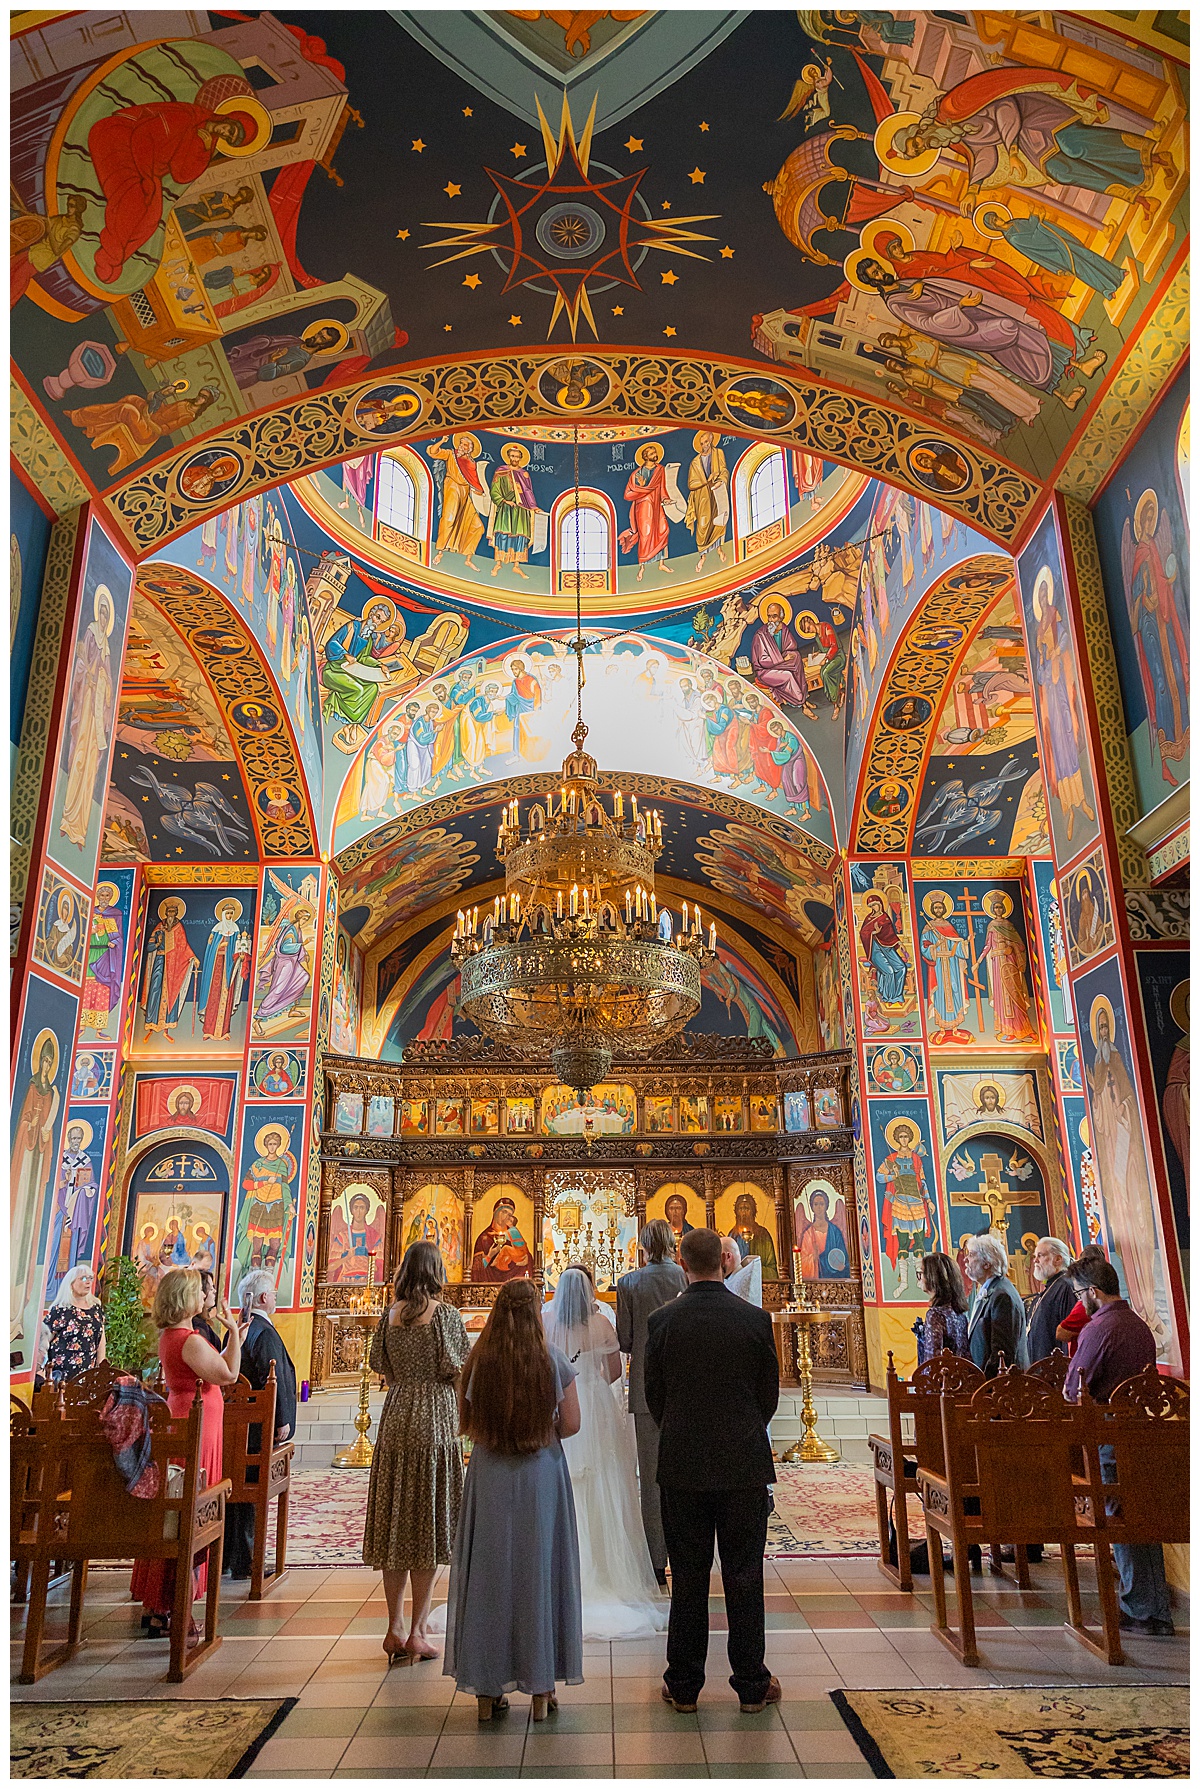 A bride and groom get married in their Orthodox wedding ceremony